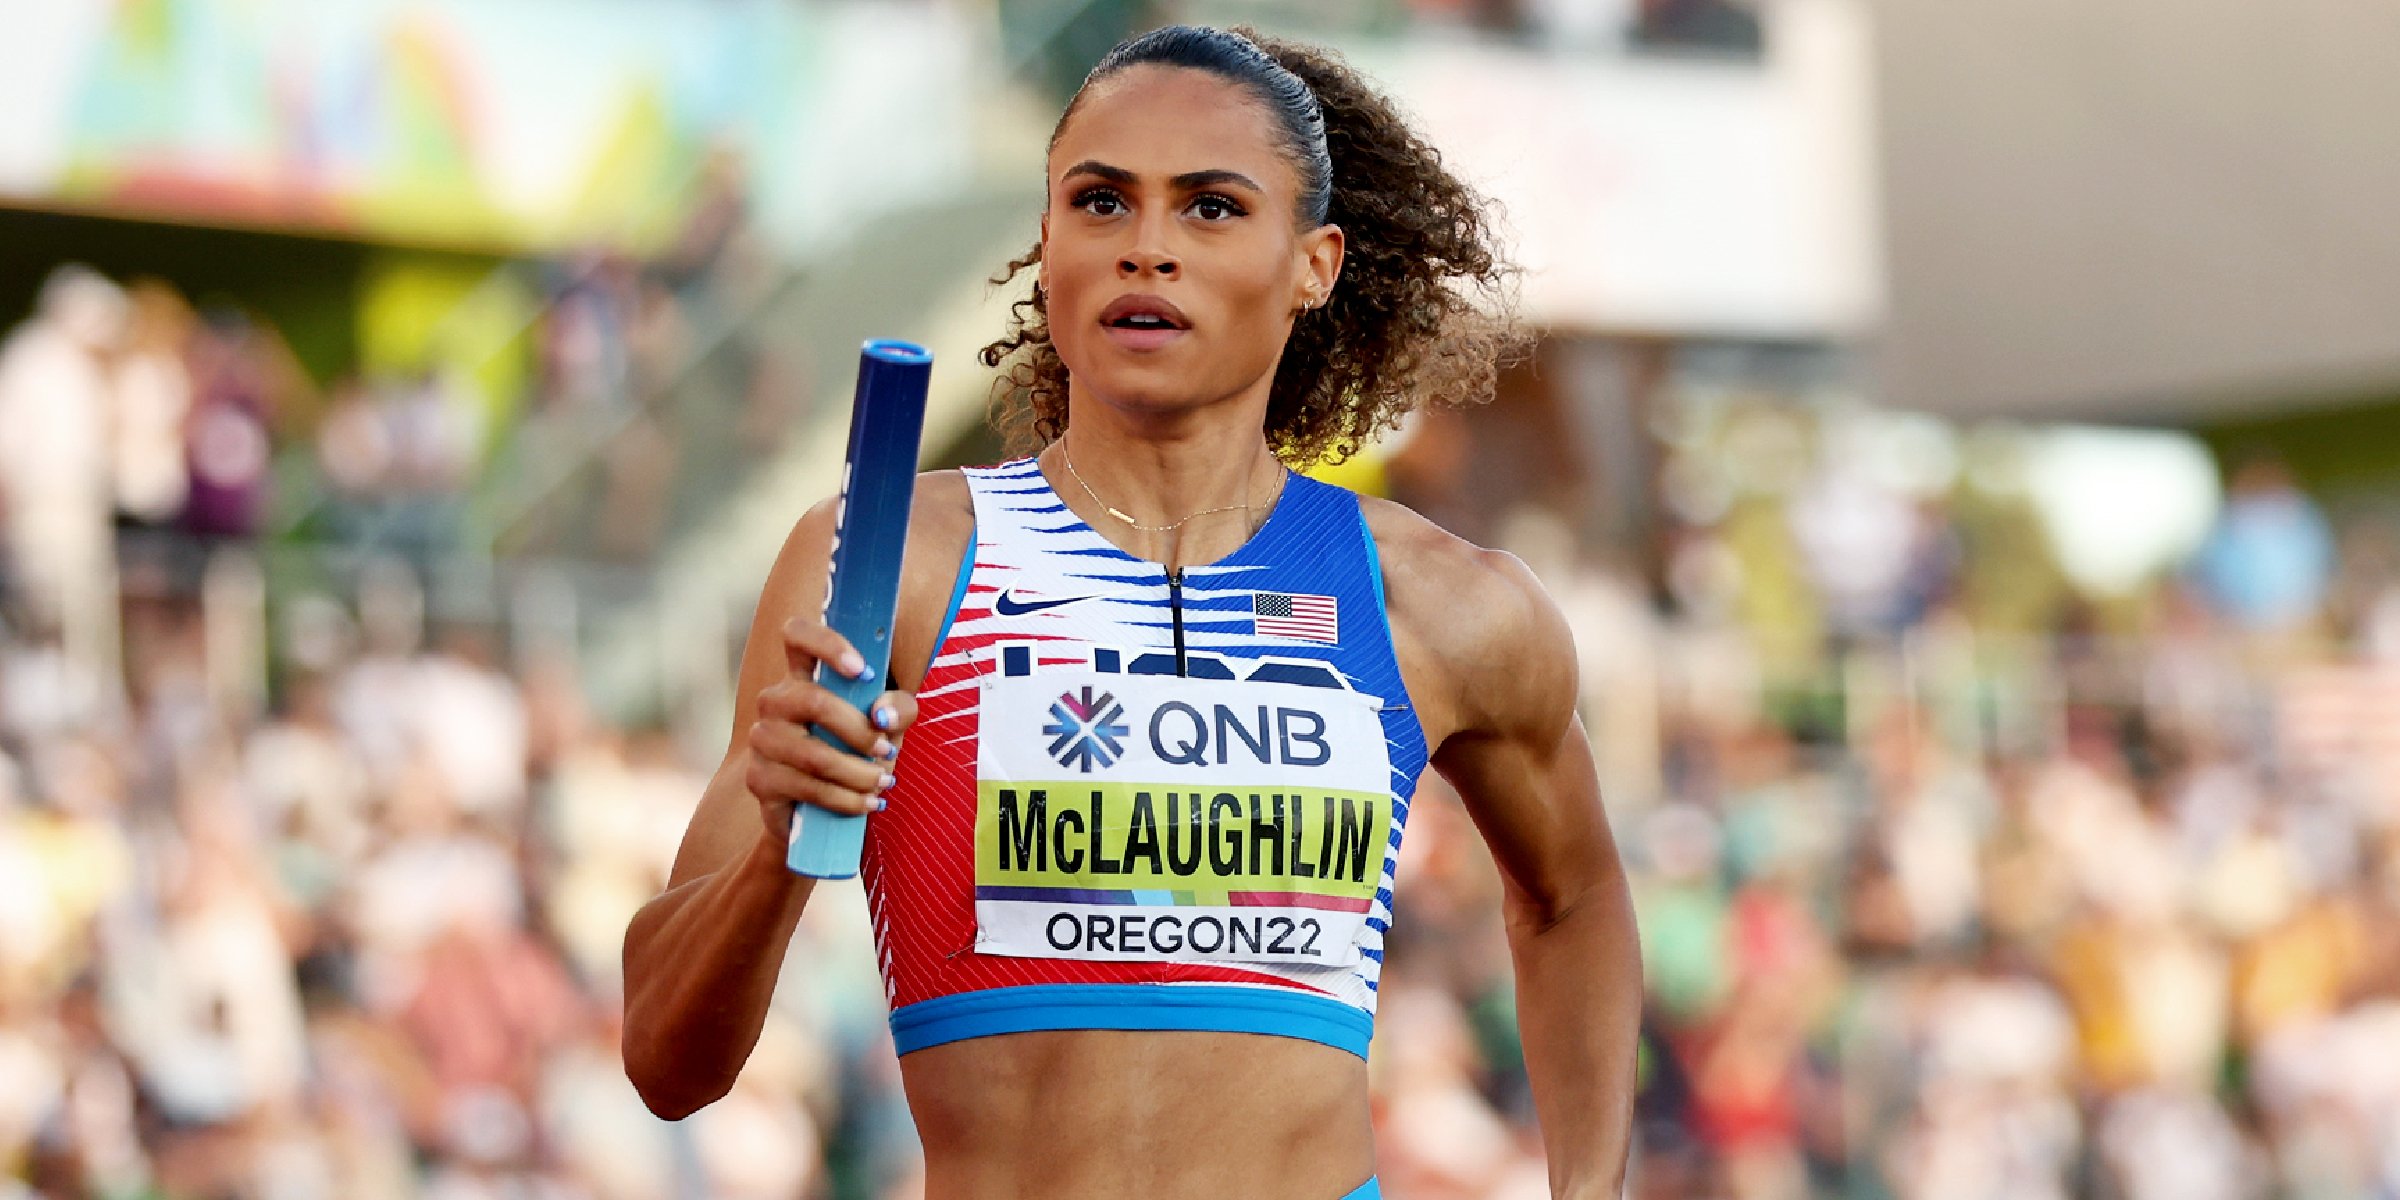 Sydney McLaughlin | Source: Getty Images